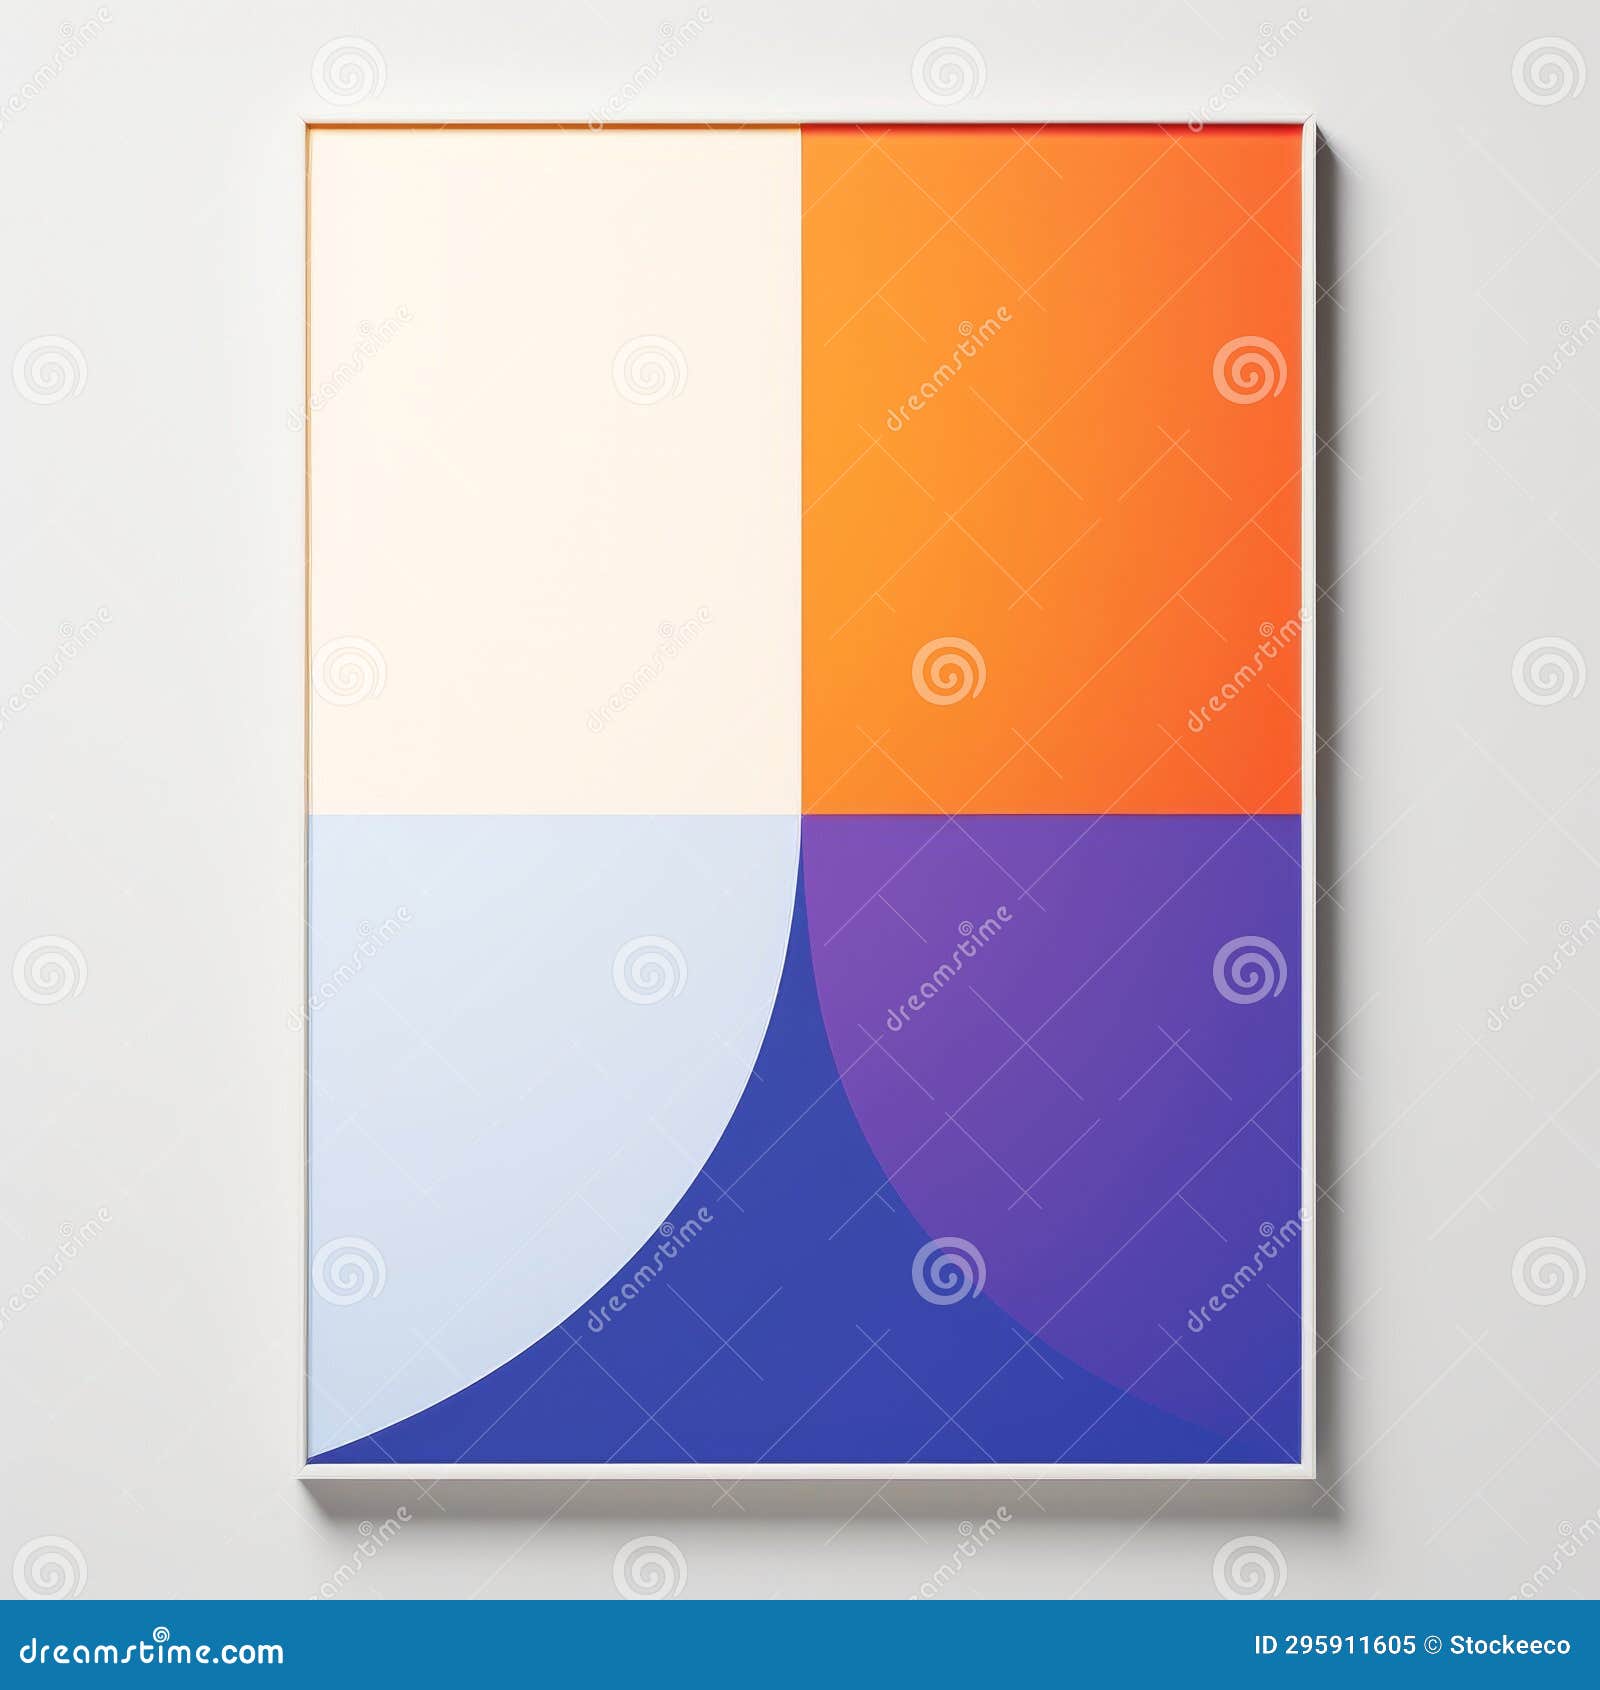 minimalist abstract canvas: geometric s and vibrant colors